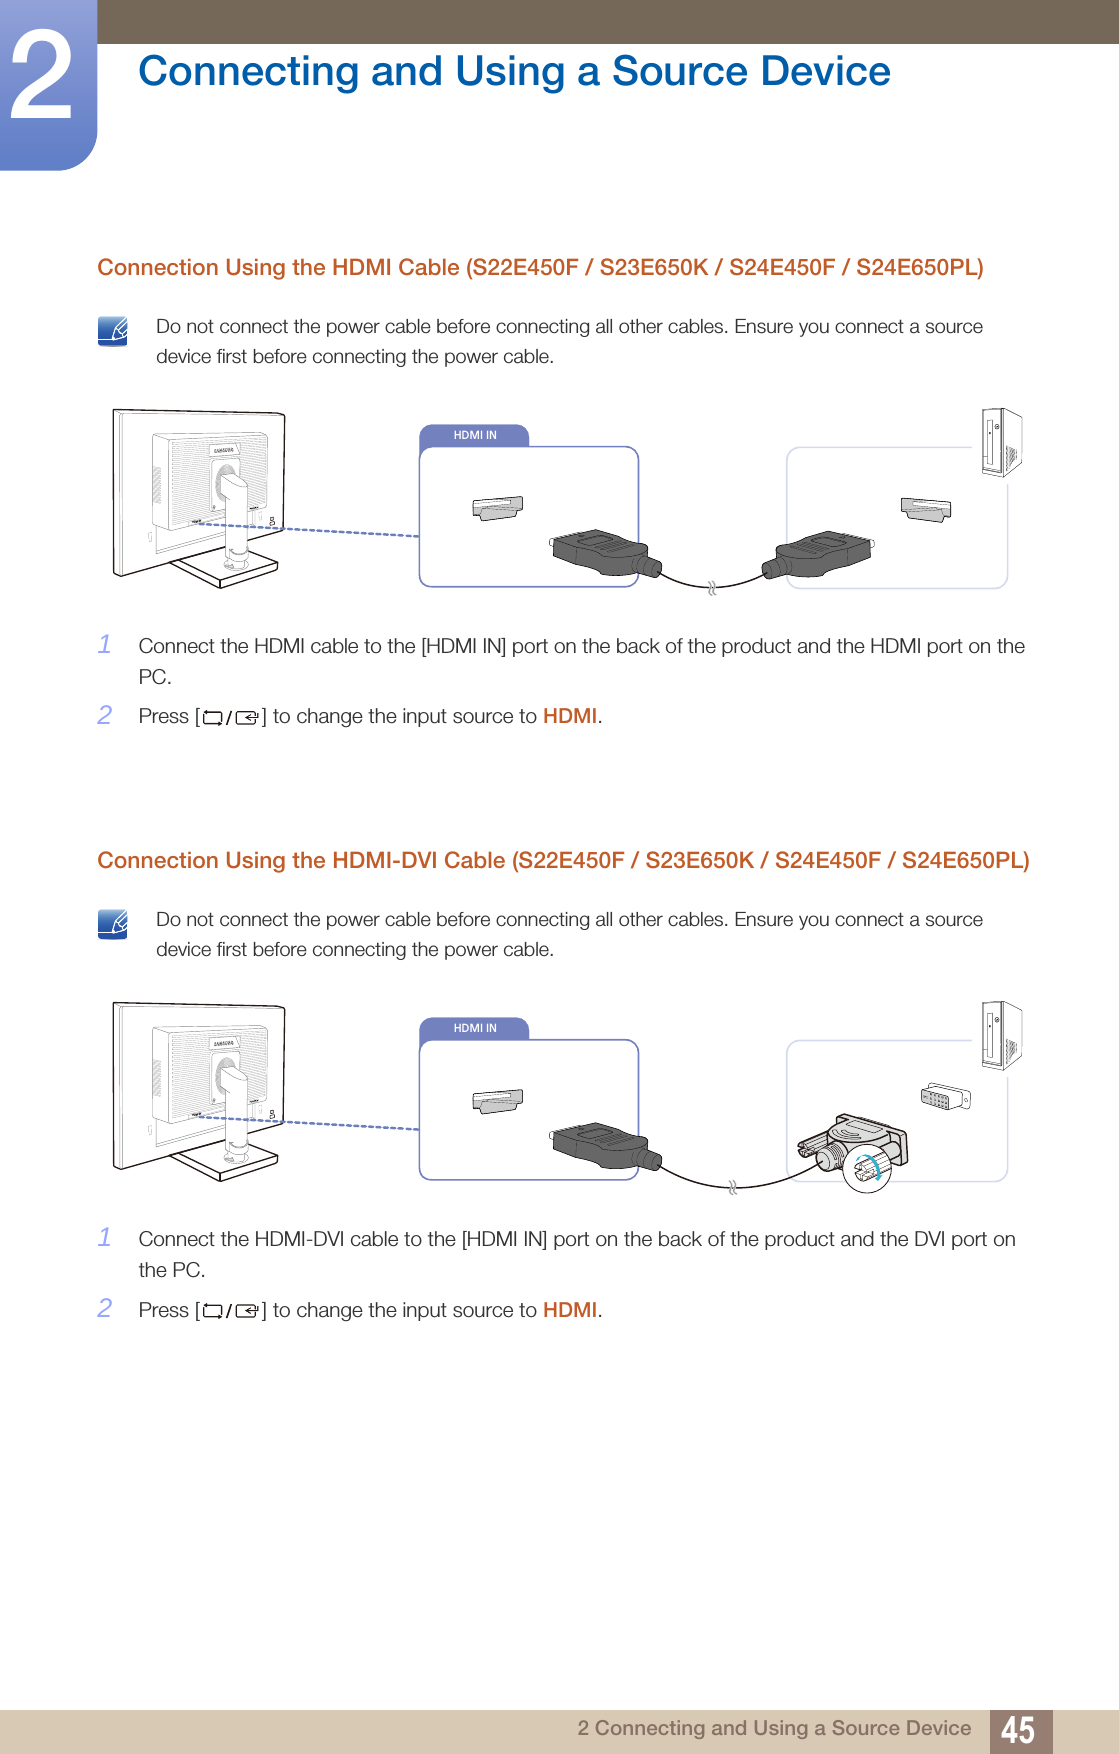 45Connecting and Using a Source Device22 Connecting and Using a Source DeviceConnection Using the HDMI Cable (S22E450F / S23E650K / S24E450F / S24E650PL) Do not connect the power cable before connecting all other cables. Ensure you connect a source device first before connecting the power cable. 1Connect the HDMI cable to the [HDMI IN] port on the back of the product and the HDMI port on the PC.2Press [ ] to change the input source to HDMI. Connection Using the HDMI-DVI Cable (S22E450F / S23E650K / S24E450F / S24E650PL) Do not connect the power cable before connecting all other cables. Ensure you connect a source device first before connecting the power cable. 1Connect the HDMI-DVI cable to the [HDMI IN] port on the back of the product and the DVI port on the PC.2Press [ ] to change the input source to HDMI.HDMI IN                  HDMI IN                           HDMI IN                  HDMI IN                           